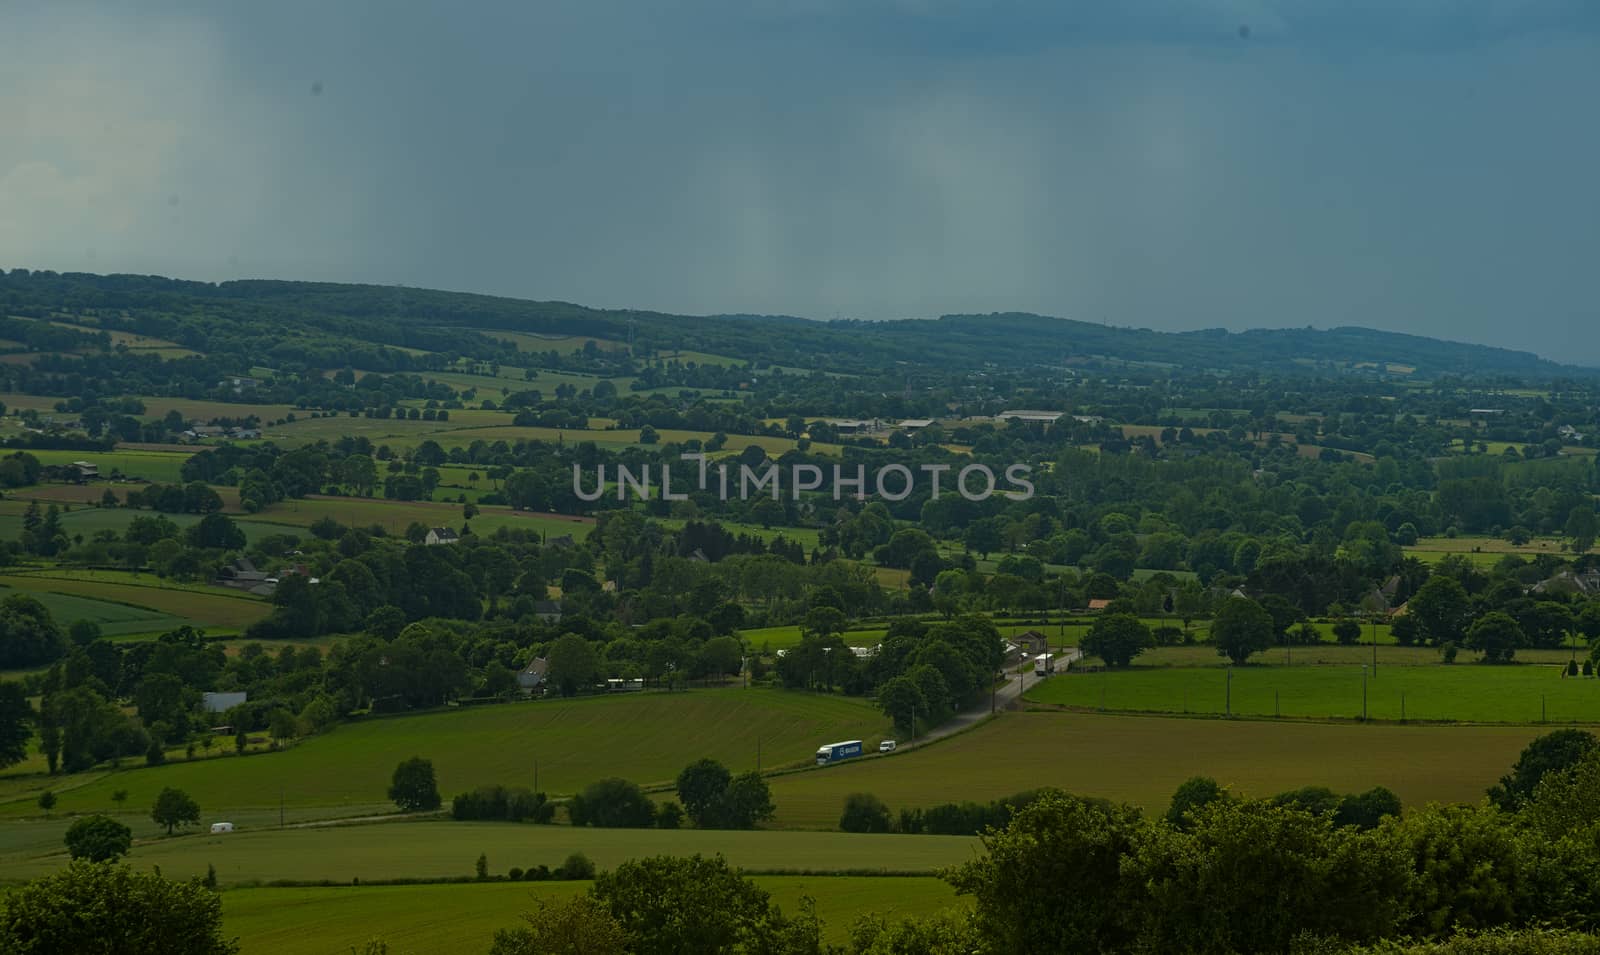 View from the hill on landscape in rural Normandy and storm forming in the distance